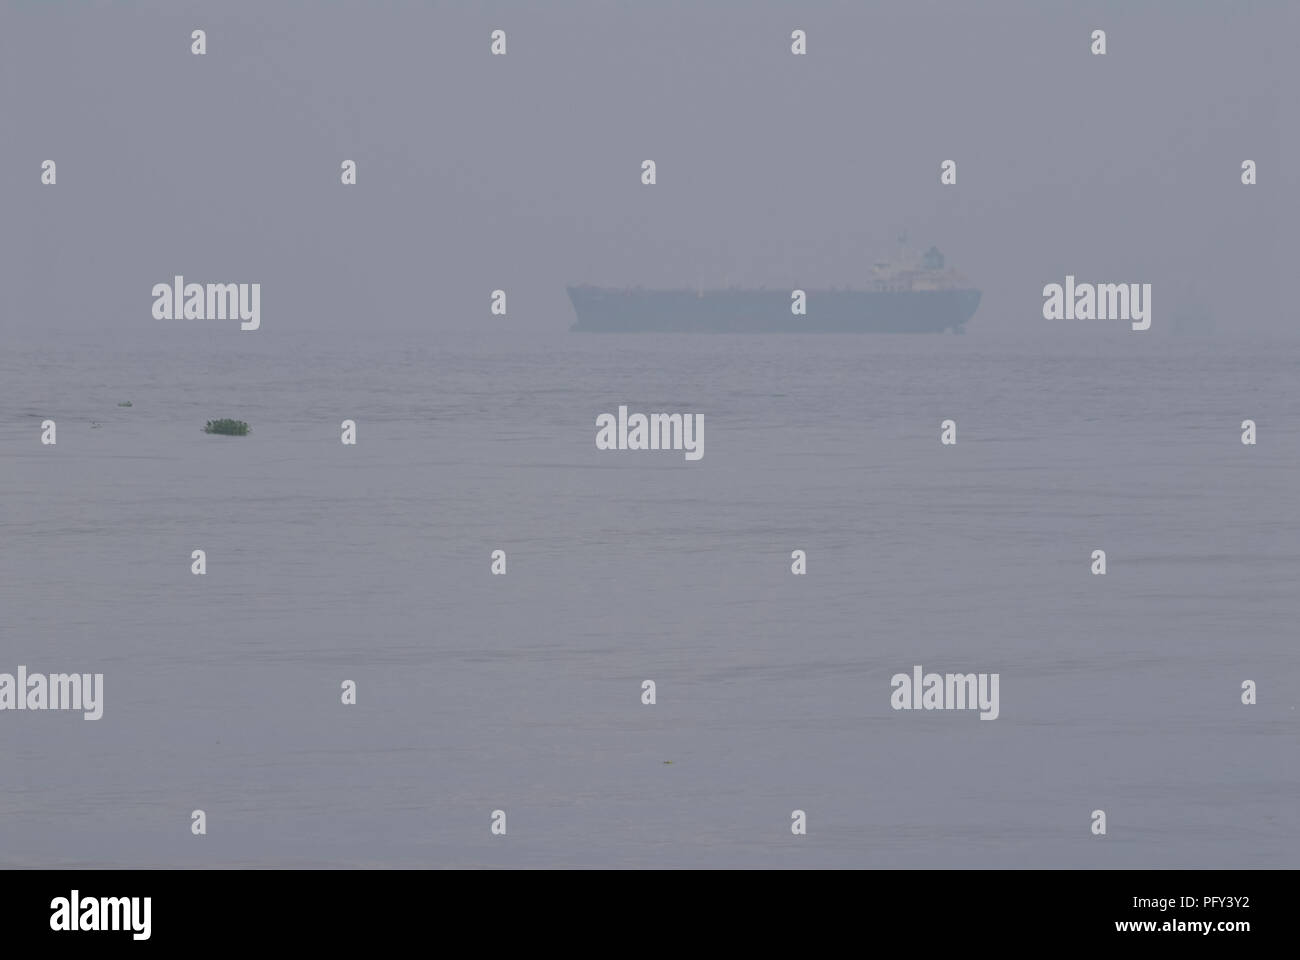 Oil / Chemical tankers at sea during a misty day Stock Photo